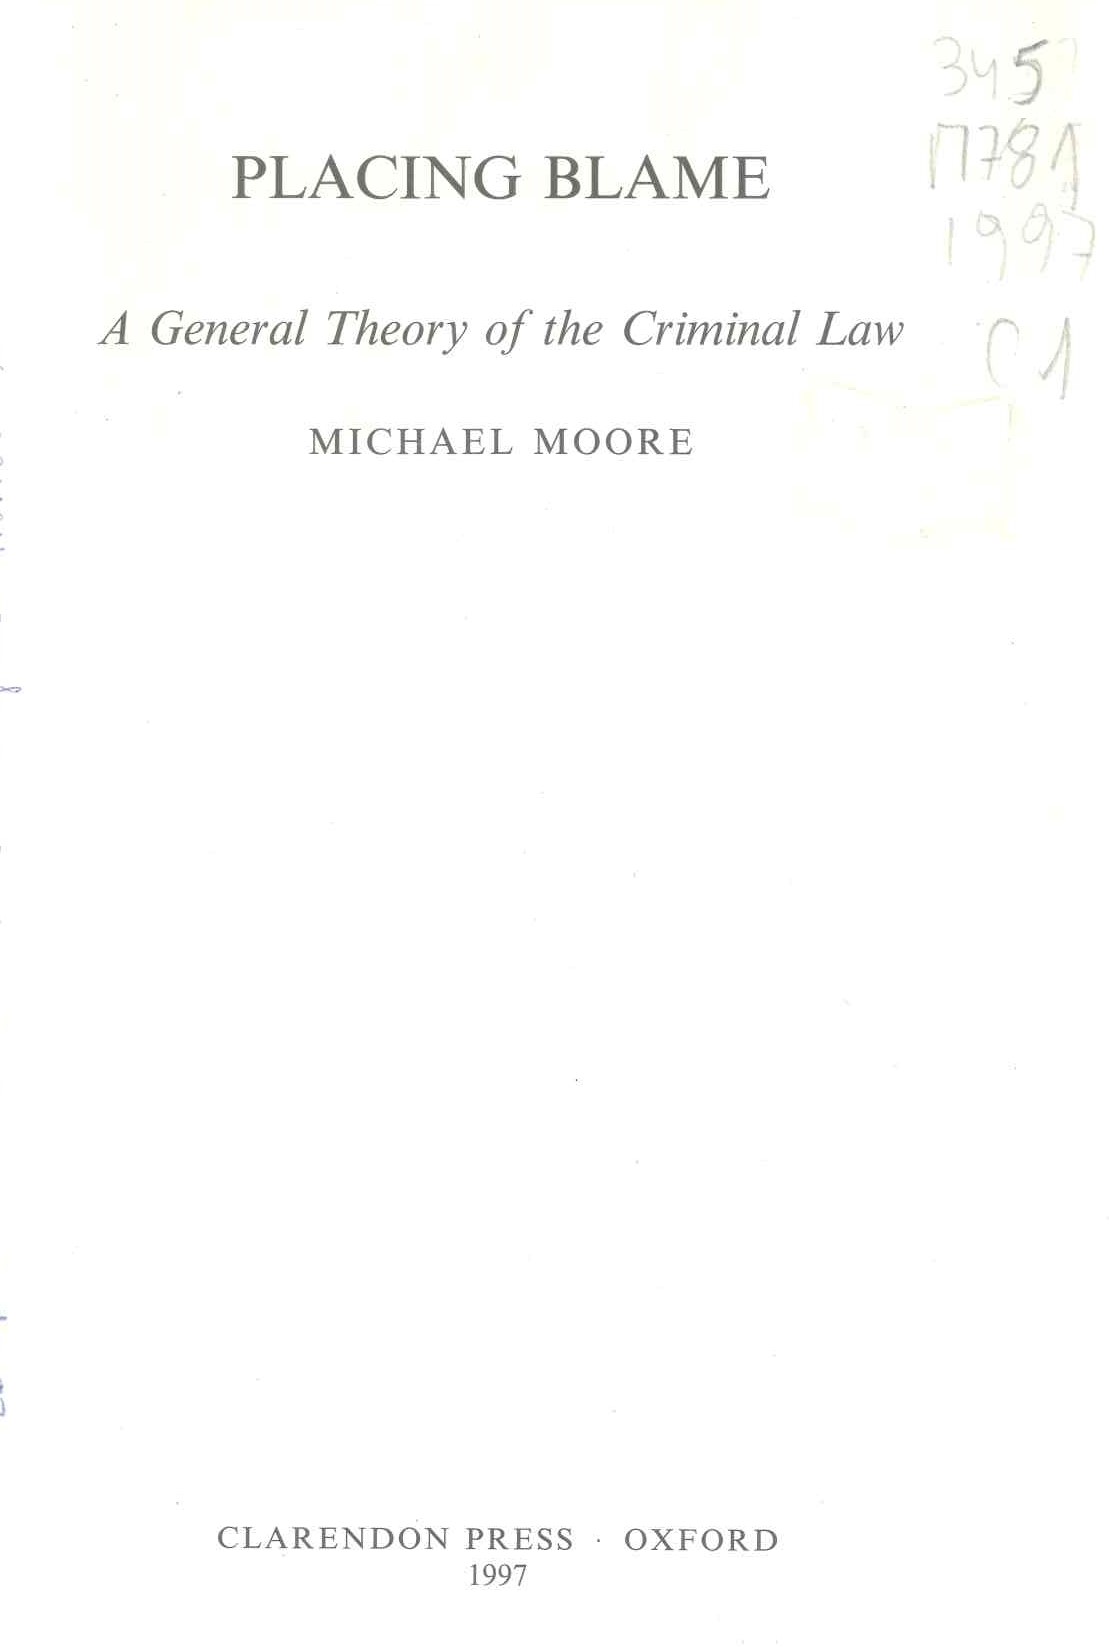 Placing blame : a theoriy of the criminal law